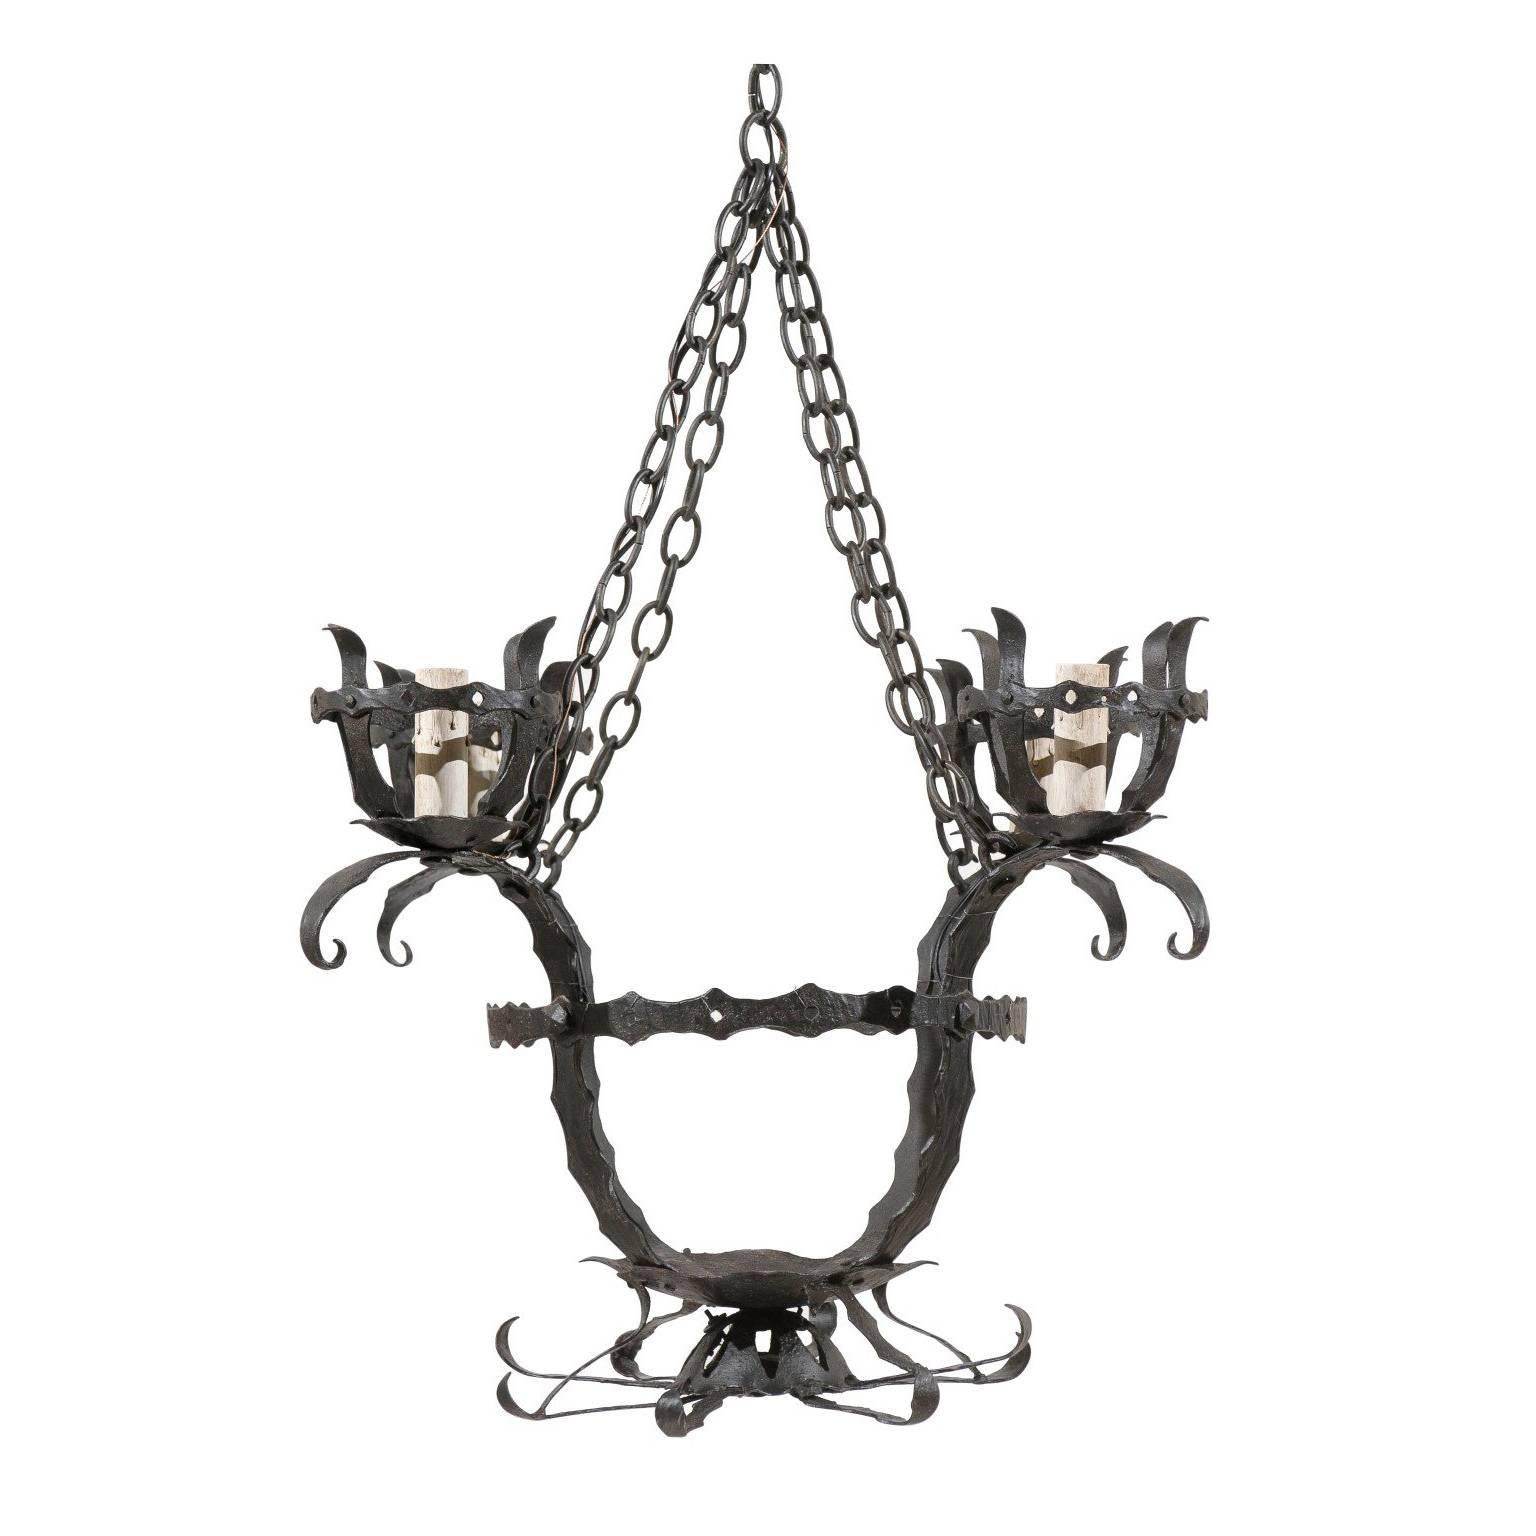 Italian Black Hammered-Iron 4 Light Basket Style Hanging Light Fixture, Re-Wired